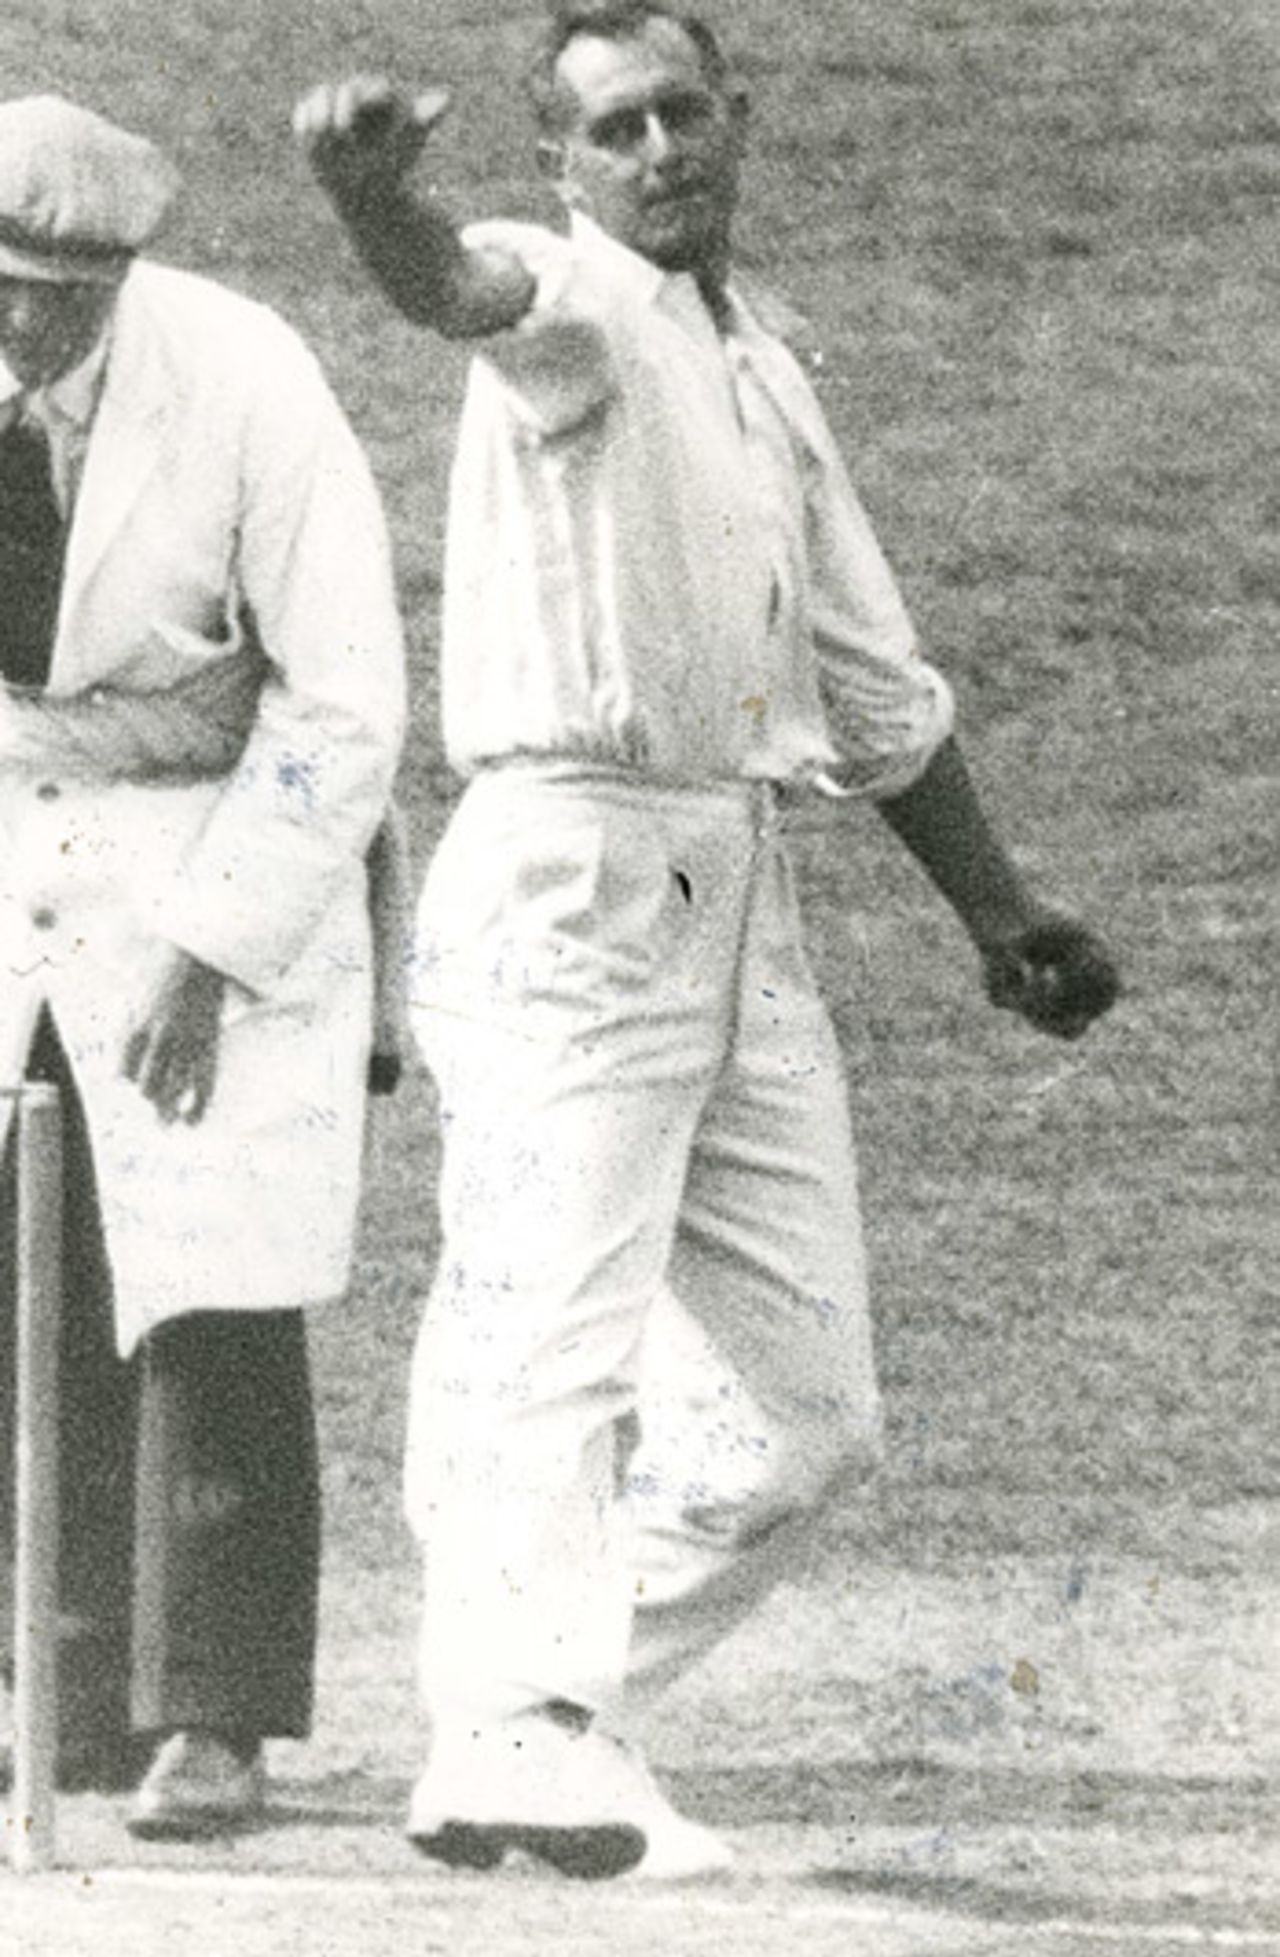 Hedley Verity bowling for Yorkshire v Surrey, The Oval, August 23, 1937